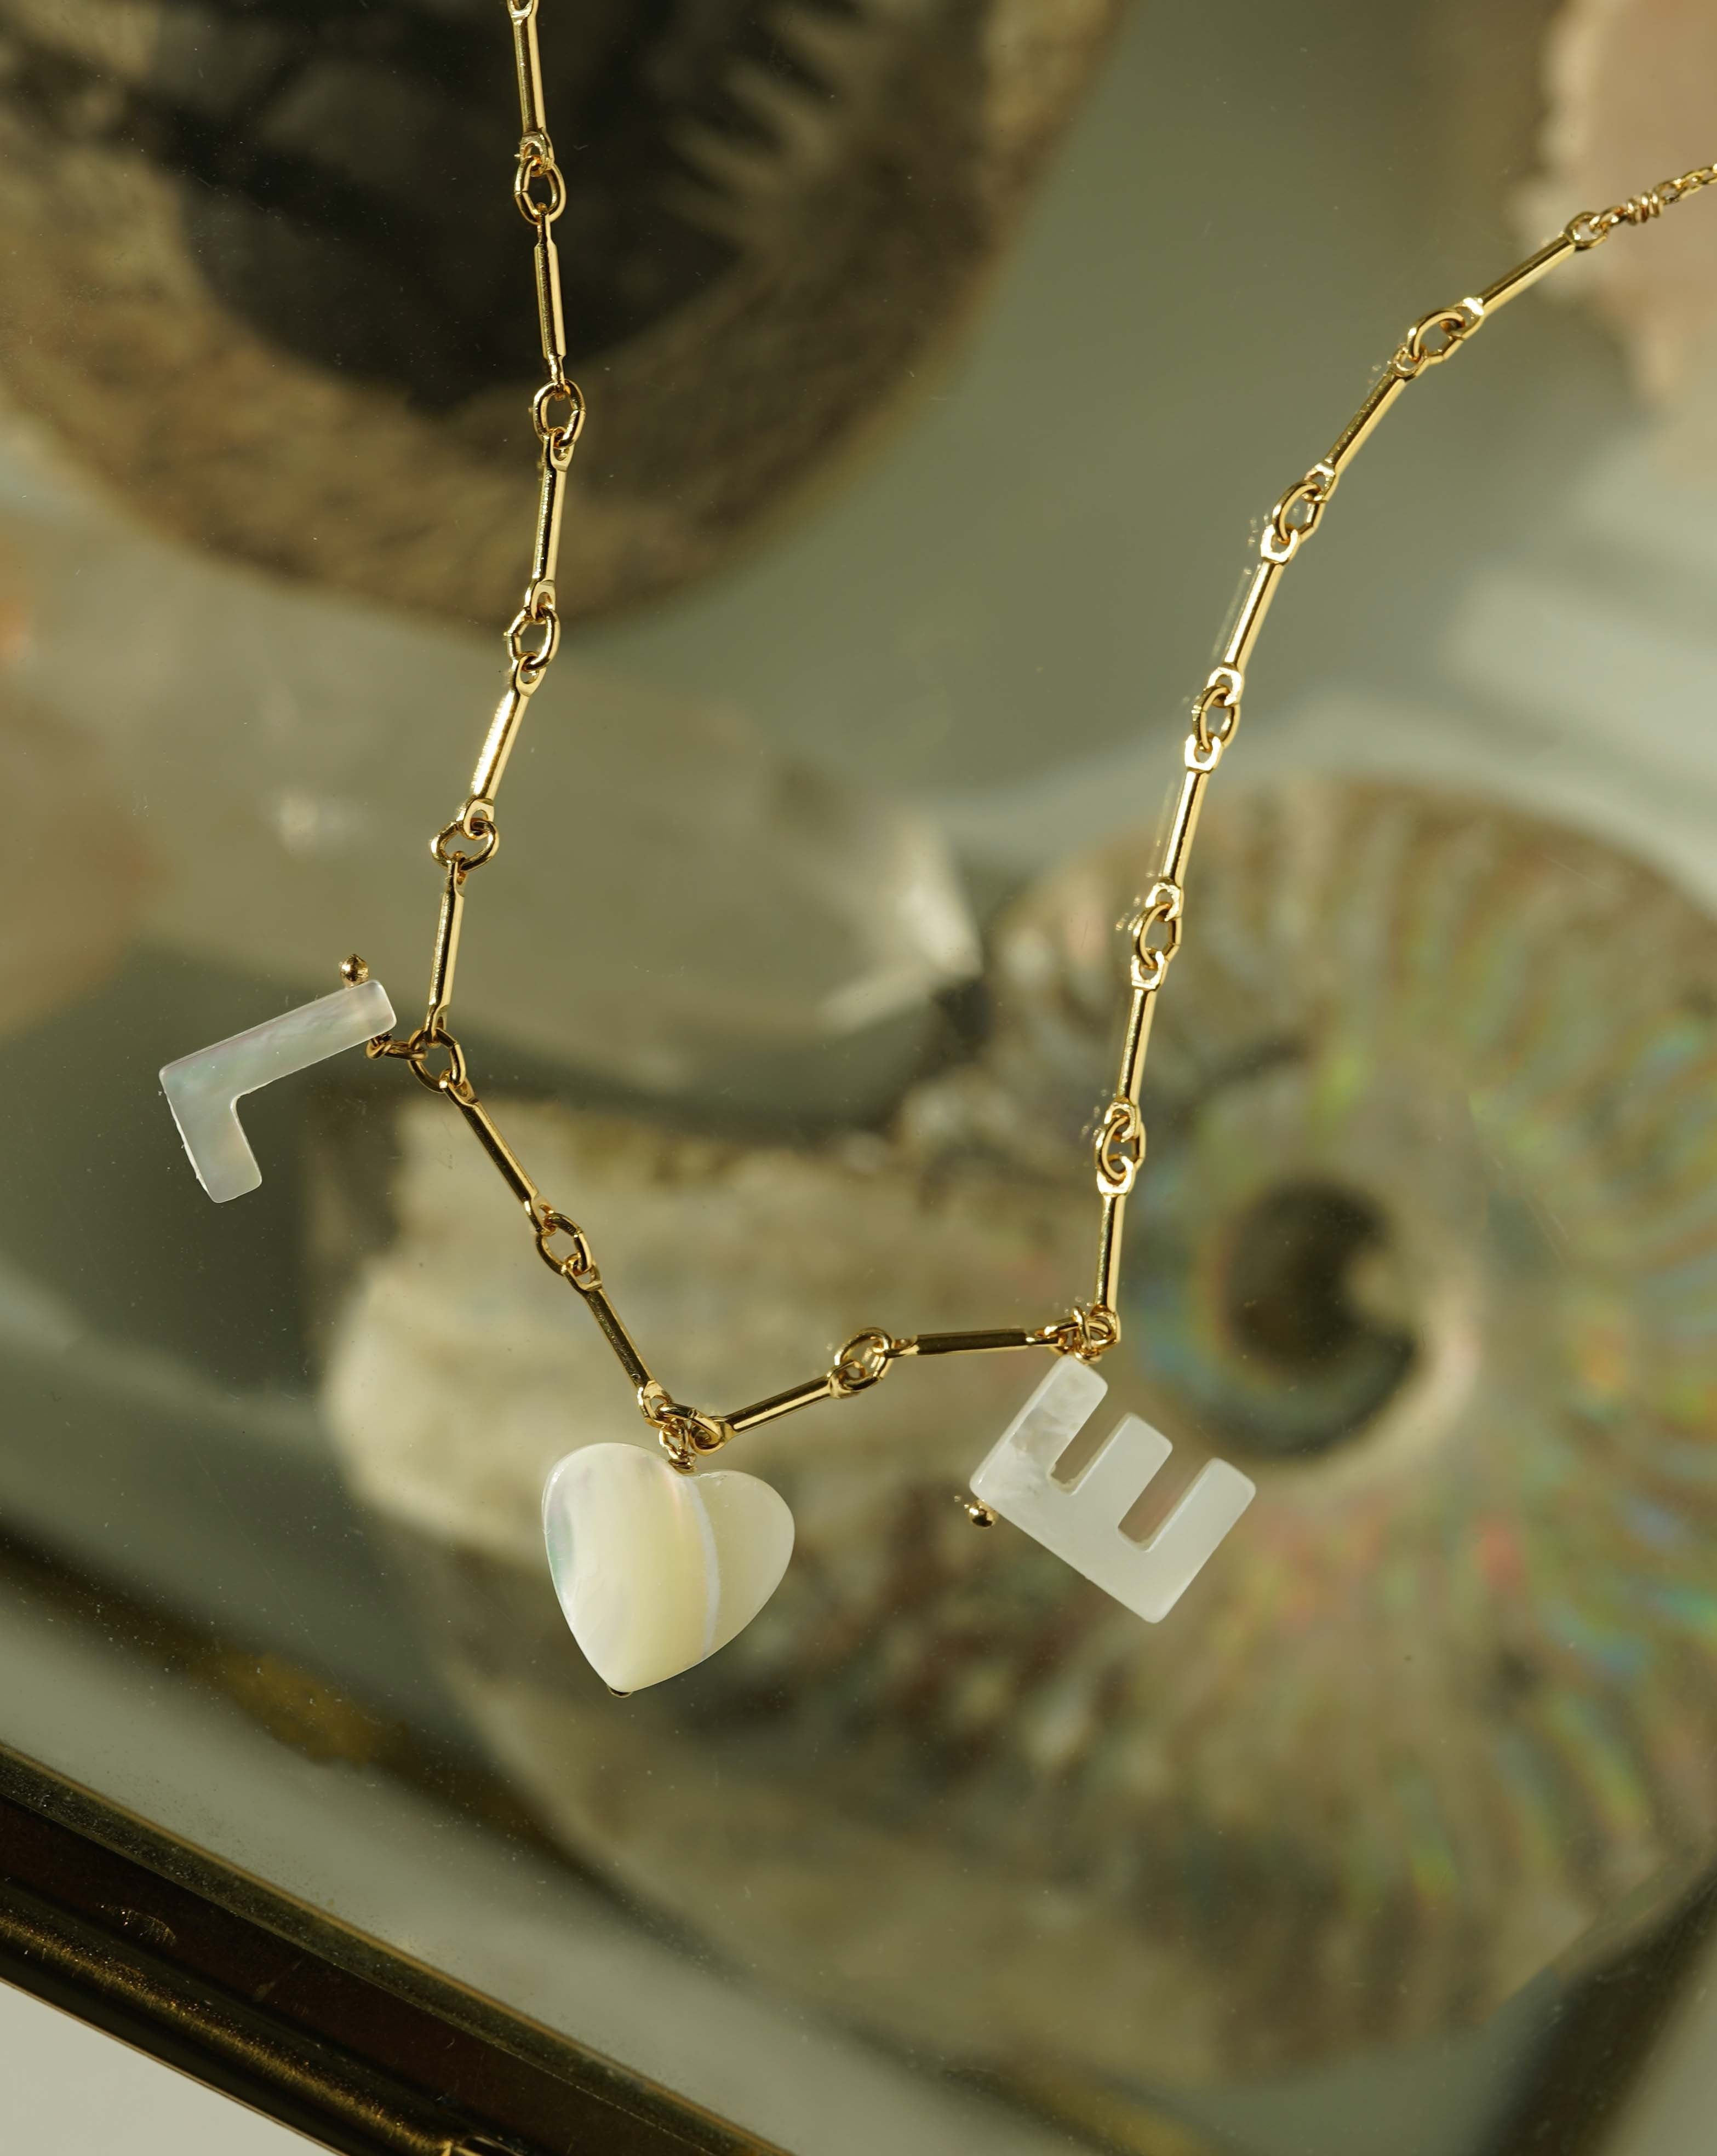 Mama Necklace by KOZAKH. A 16 to 18 inch adjustable length necklace with linked bar chain on bottom half and flat link chain on top half, crafted in 14K Gold Filled, featuring a customizable word made from hand carved Mother of Pearl letters.